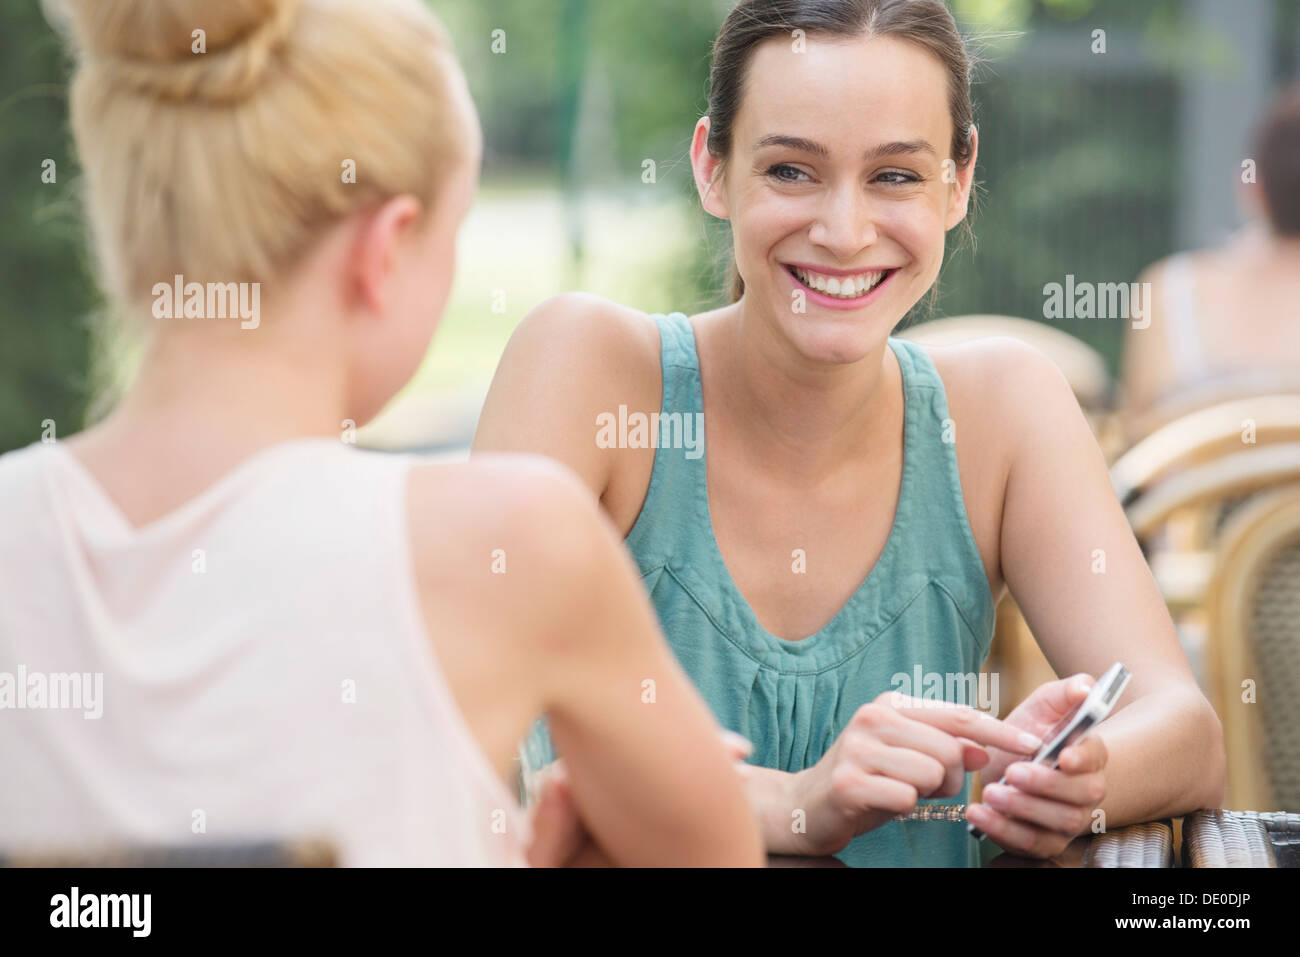 Women chatting outdoors, one woman holding smartphone Stock Photo